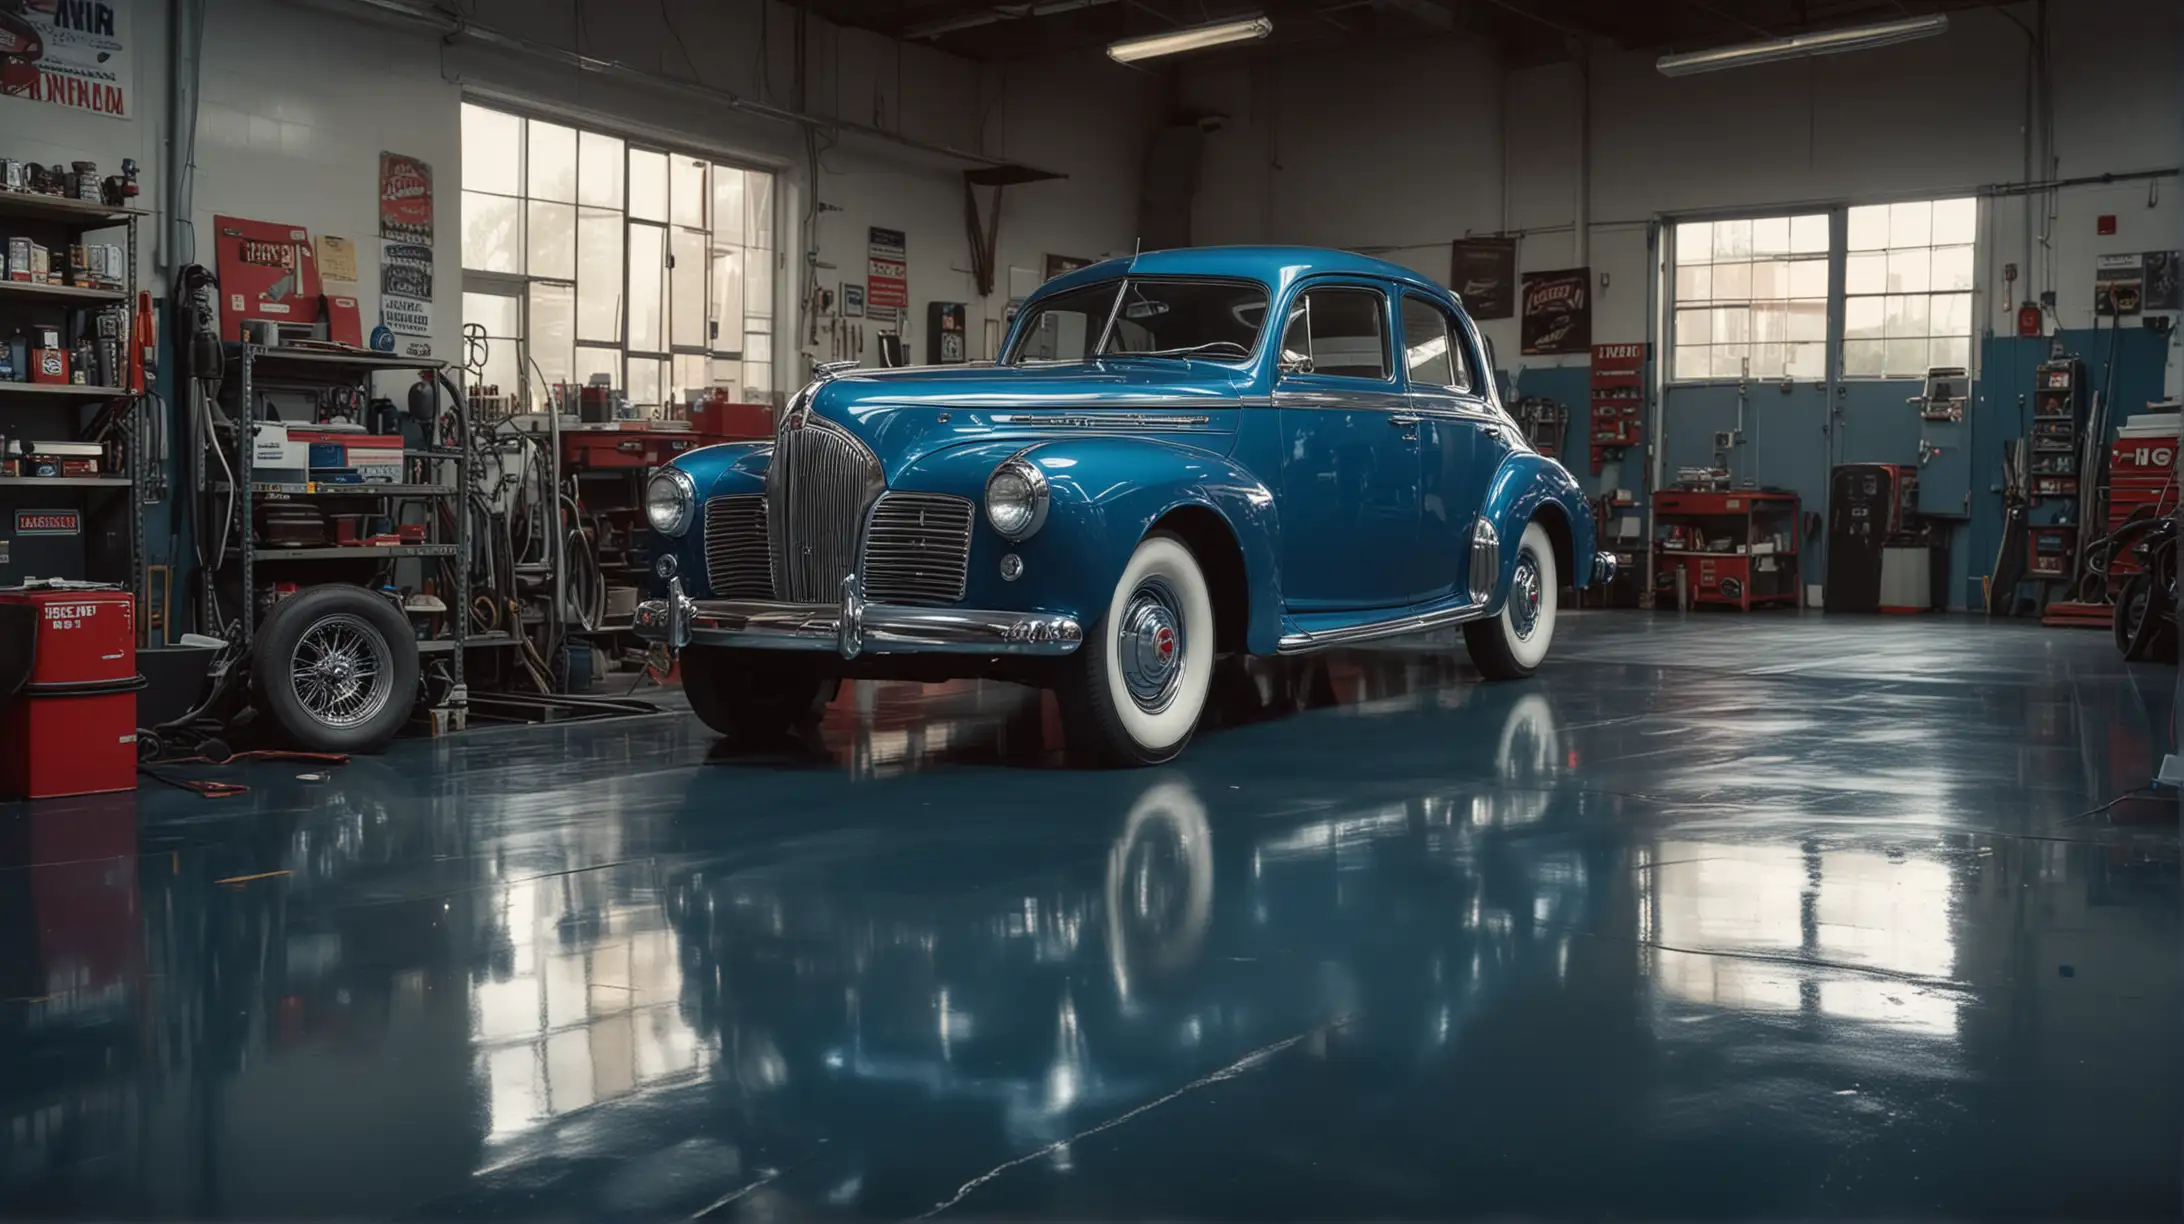 An image of the interior of a car repair shop with a chrome theme, a shiny black floor. A blue vintage 1942 Studebaker Commander car is in the mid-ground. Cinematic lighting, photographic quality.